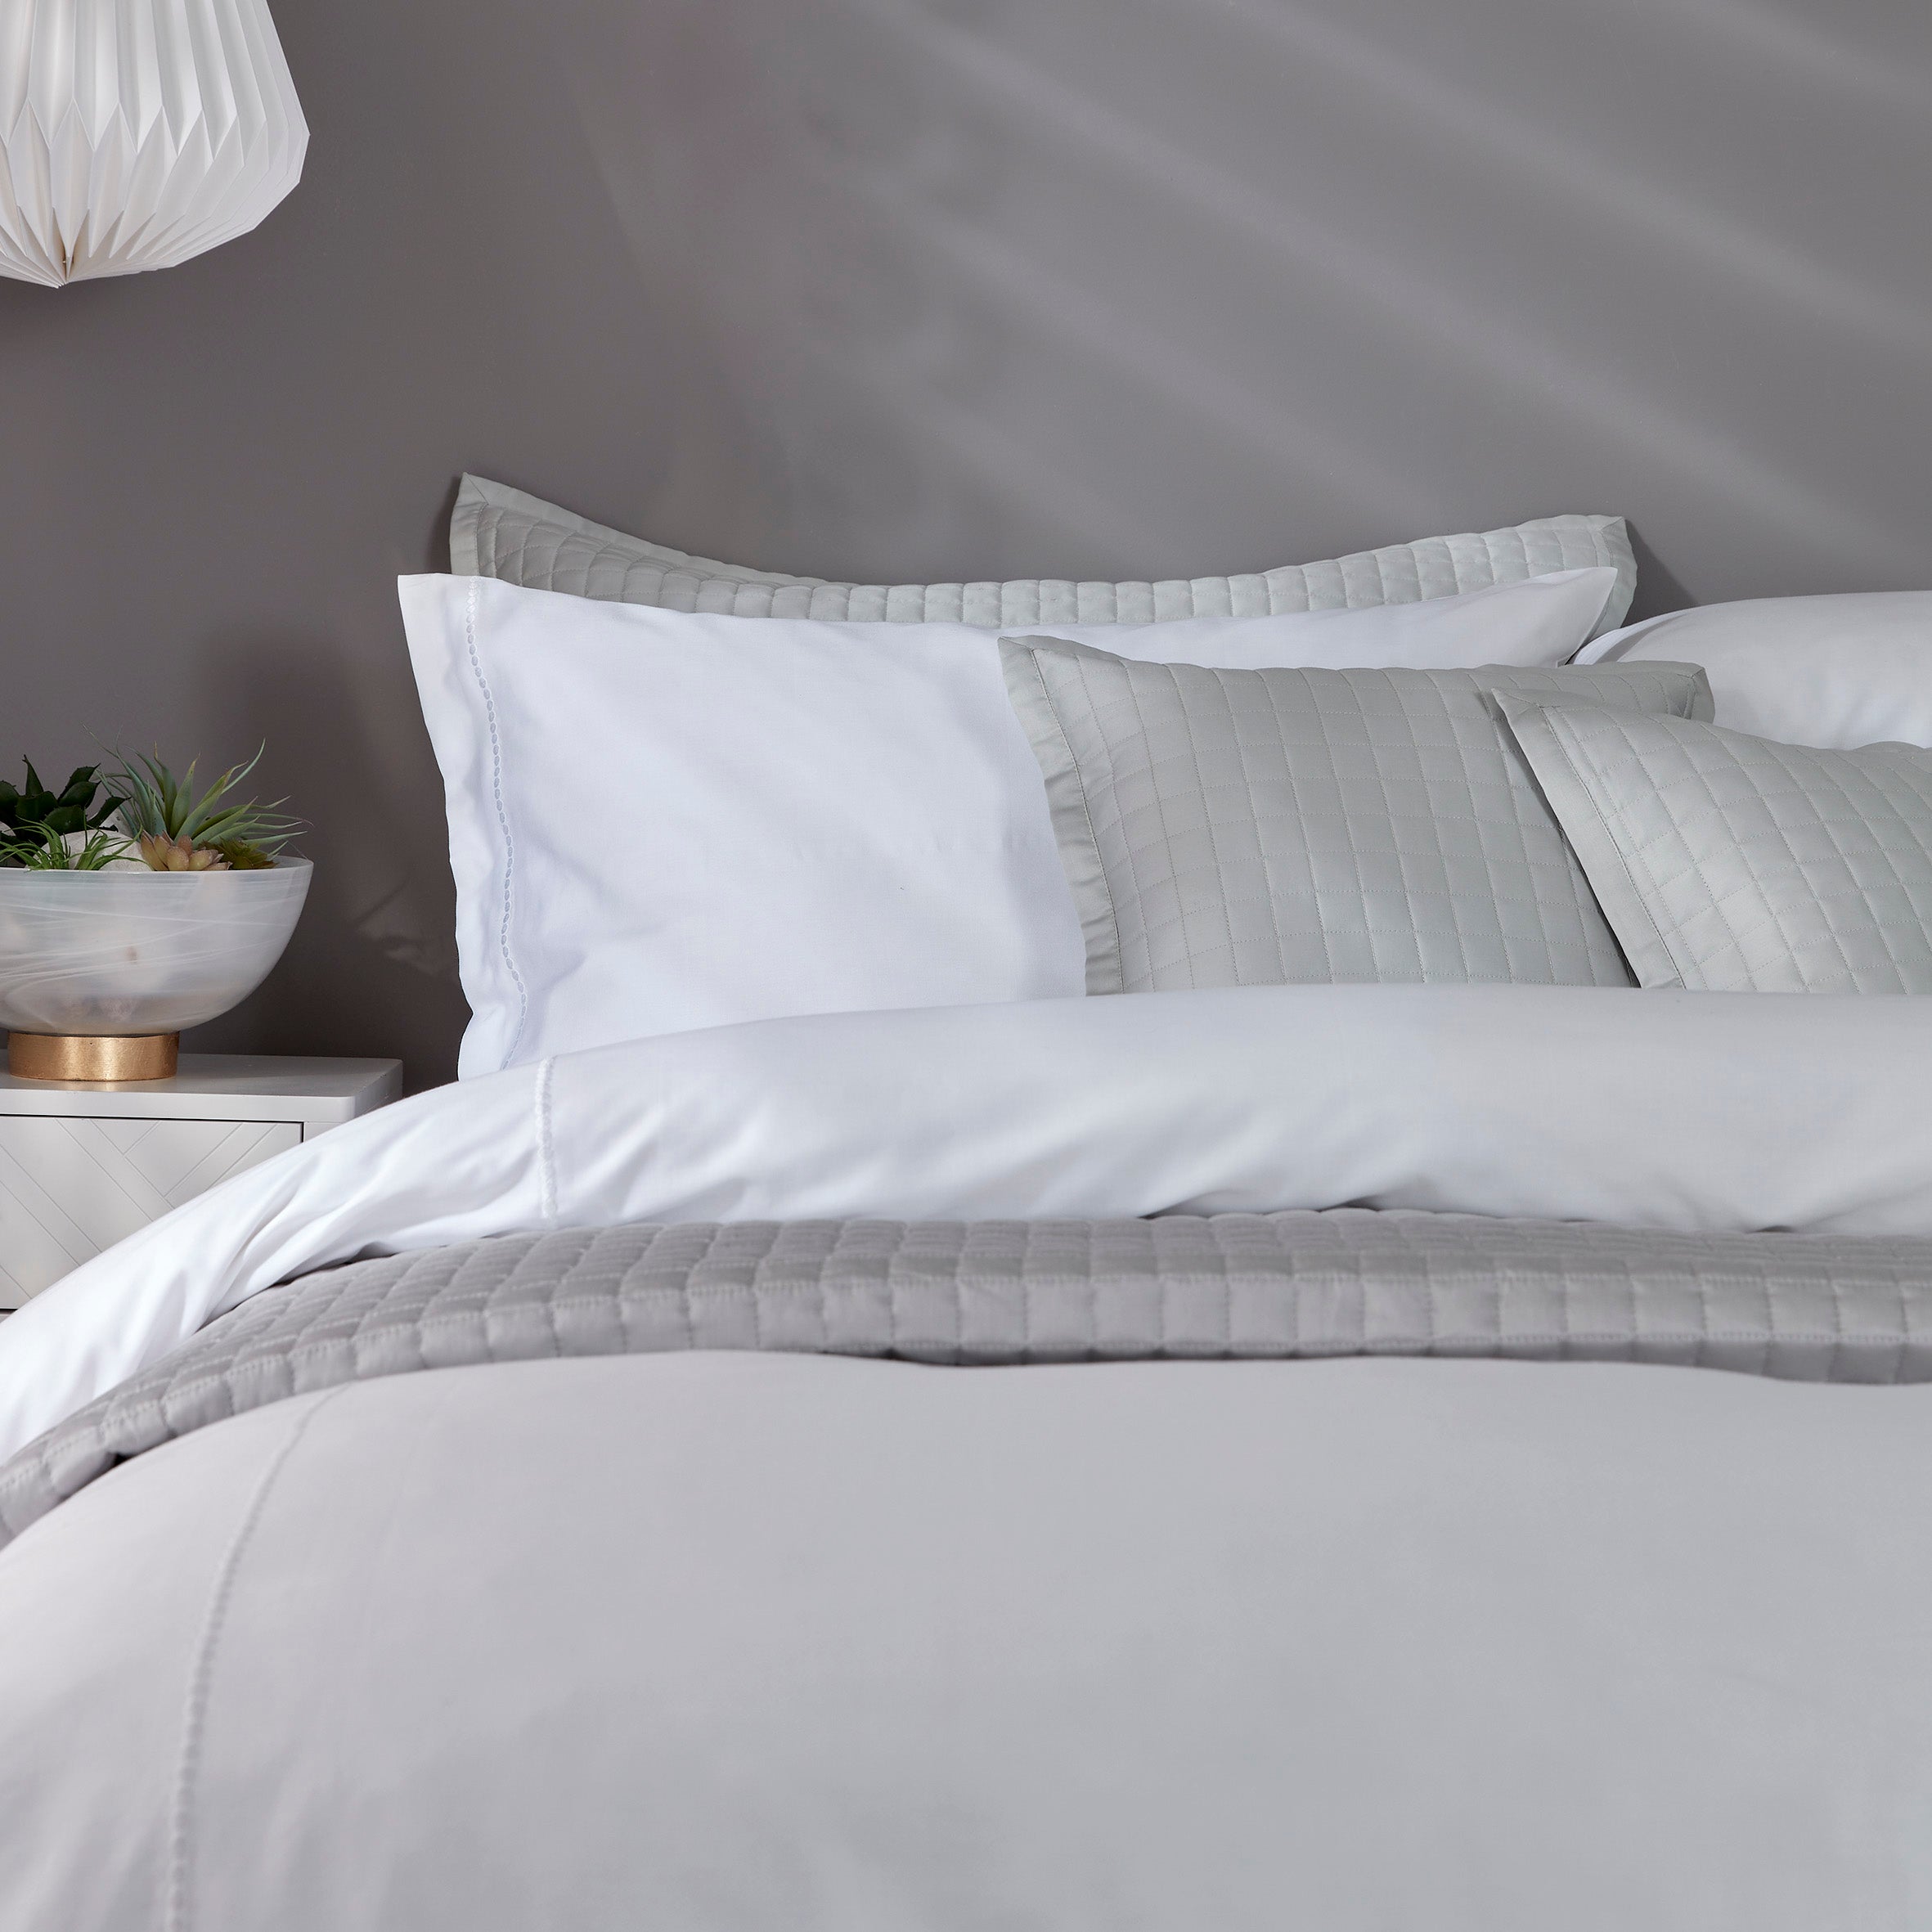 How To Arrange Pillows on a Bed: Easy Tips and Tricks